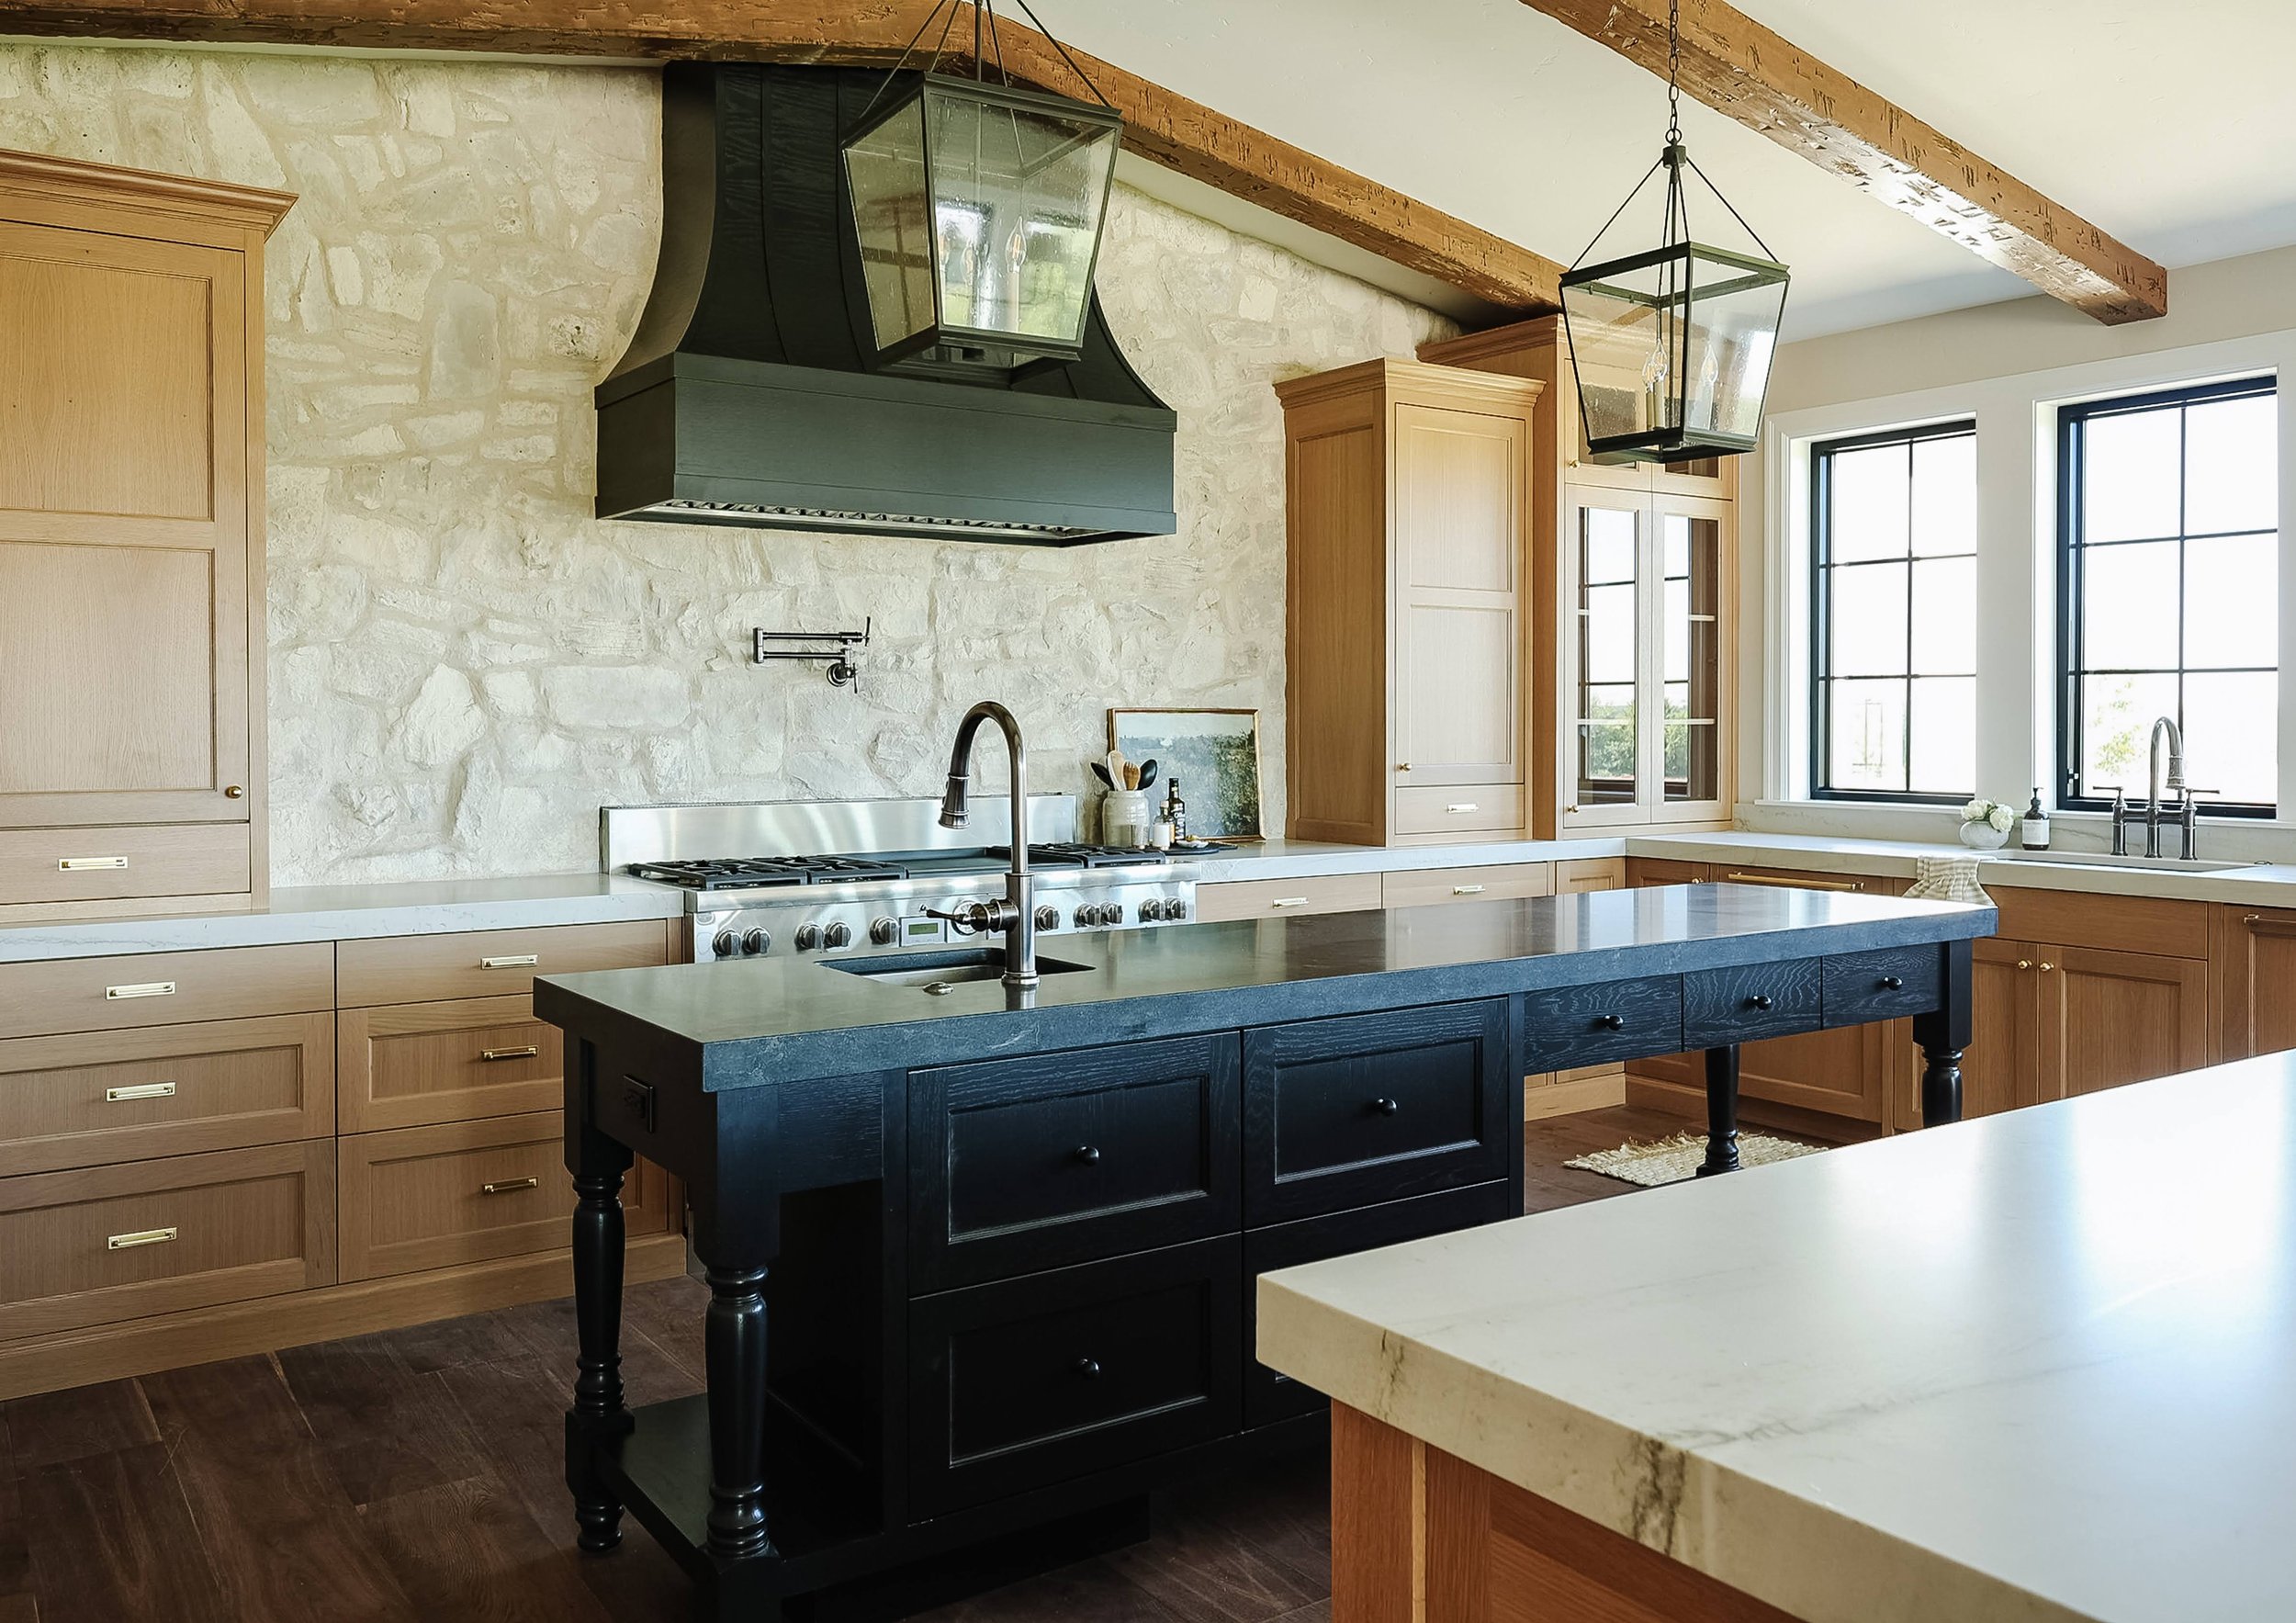  This kitchen designed by Liz Powell showcases rustic architecture with its exposed beams and stone backsplash. Exposed beams lantern pendant lights Logan Utah rustic kitchen #exposedbeams #rustickitchen #pendantlights #stonebacksplash 